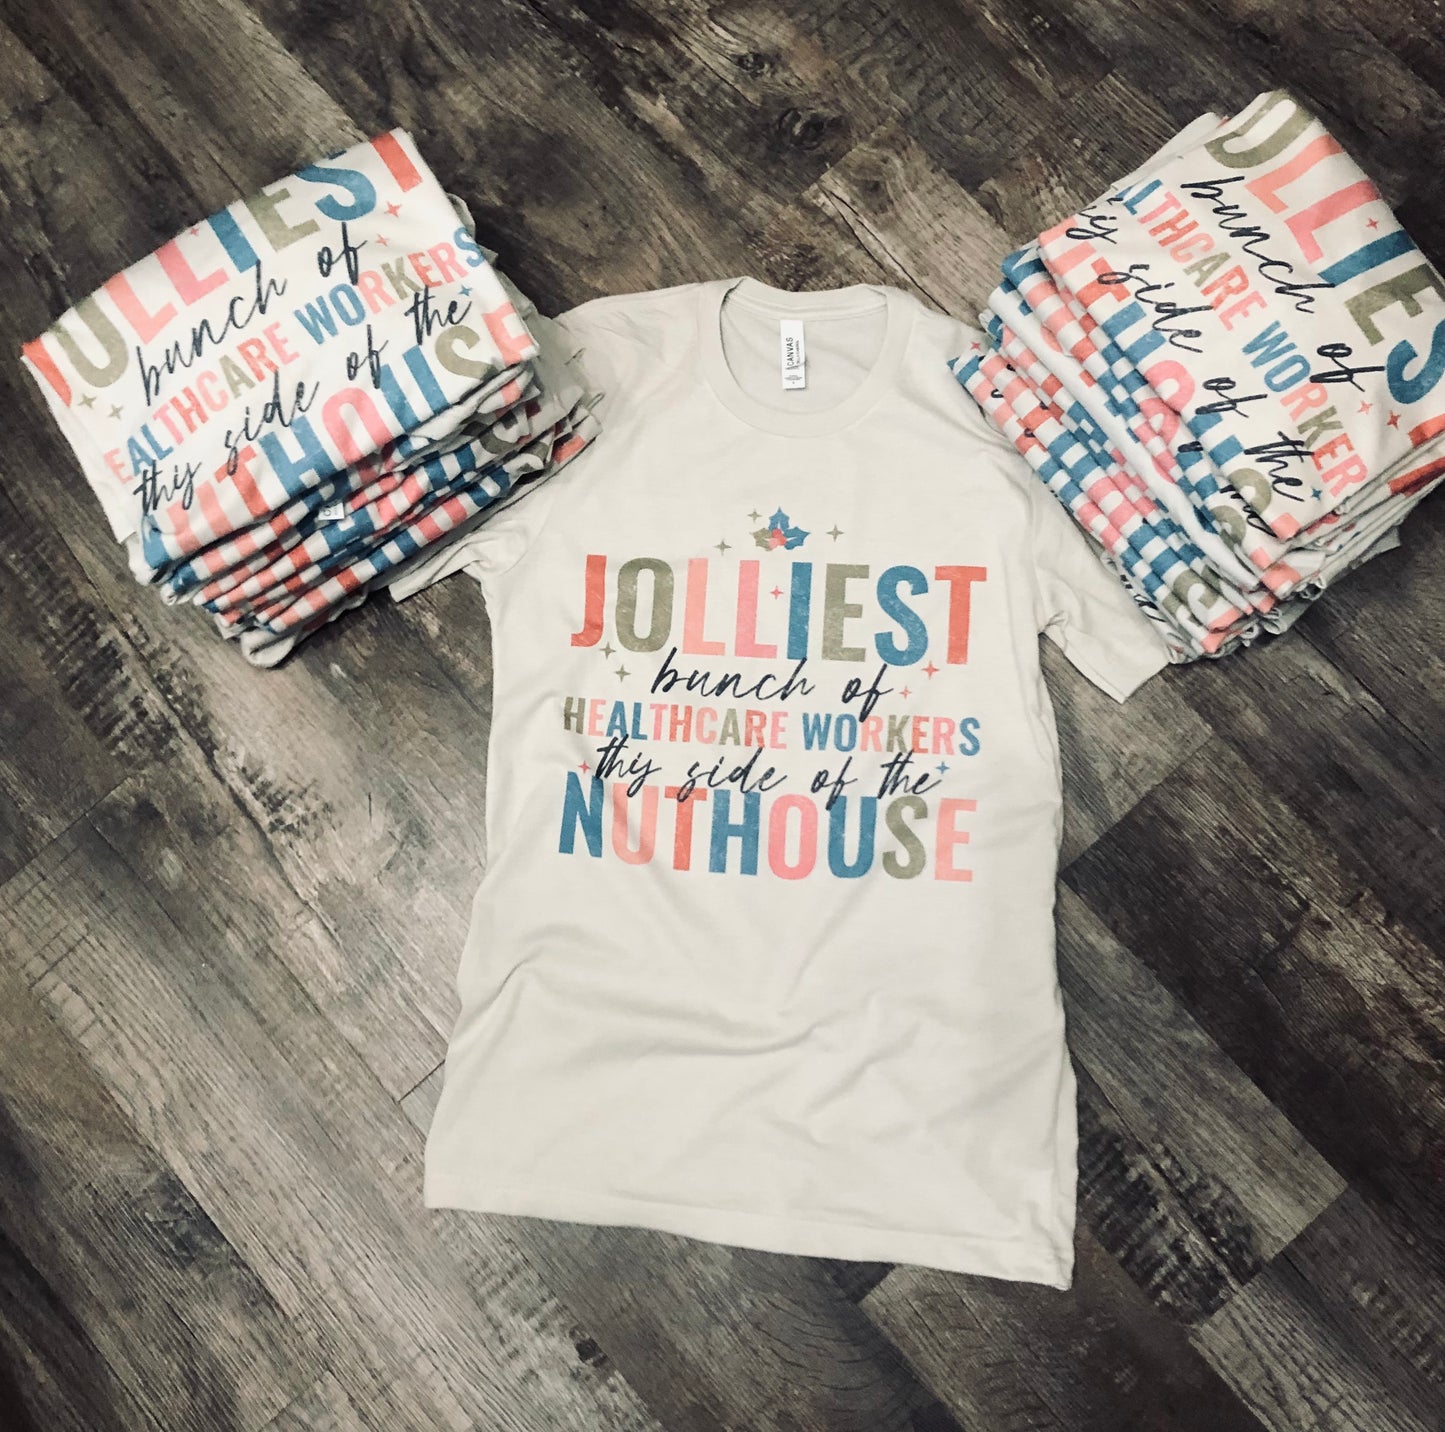 Jollies bunch of healthcare workers this side of the nuthouse distressed graphic tee